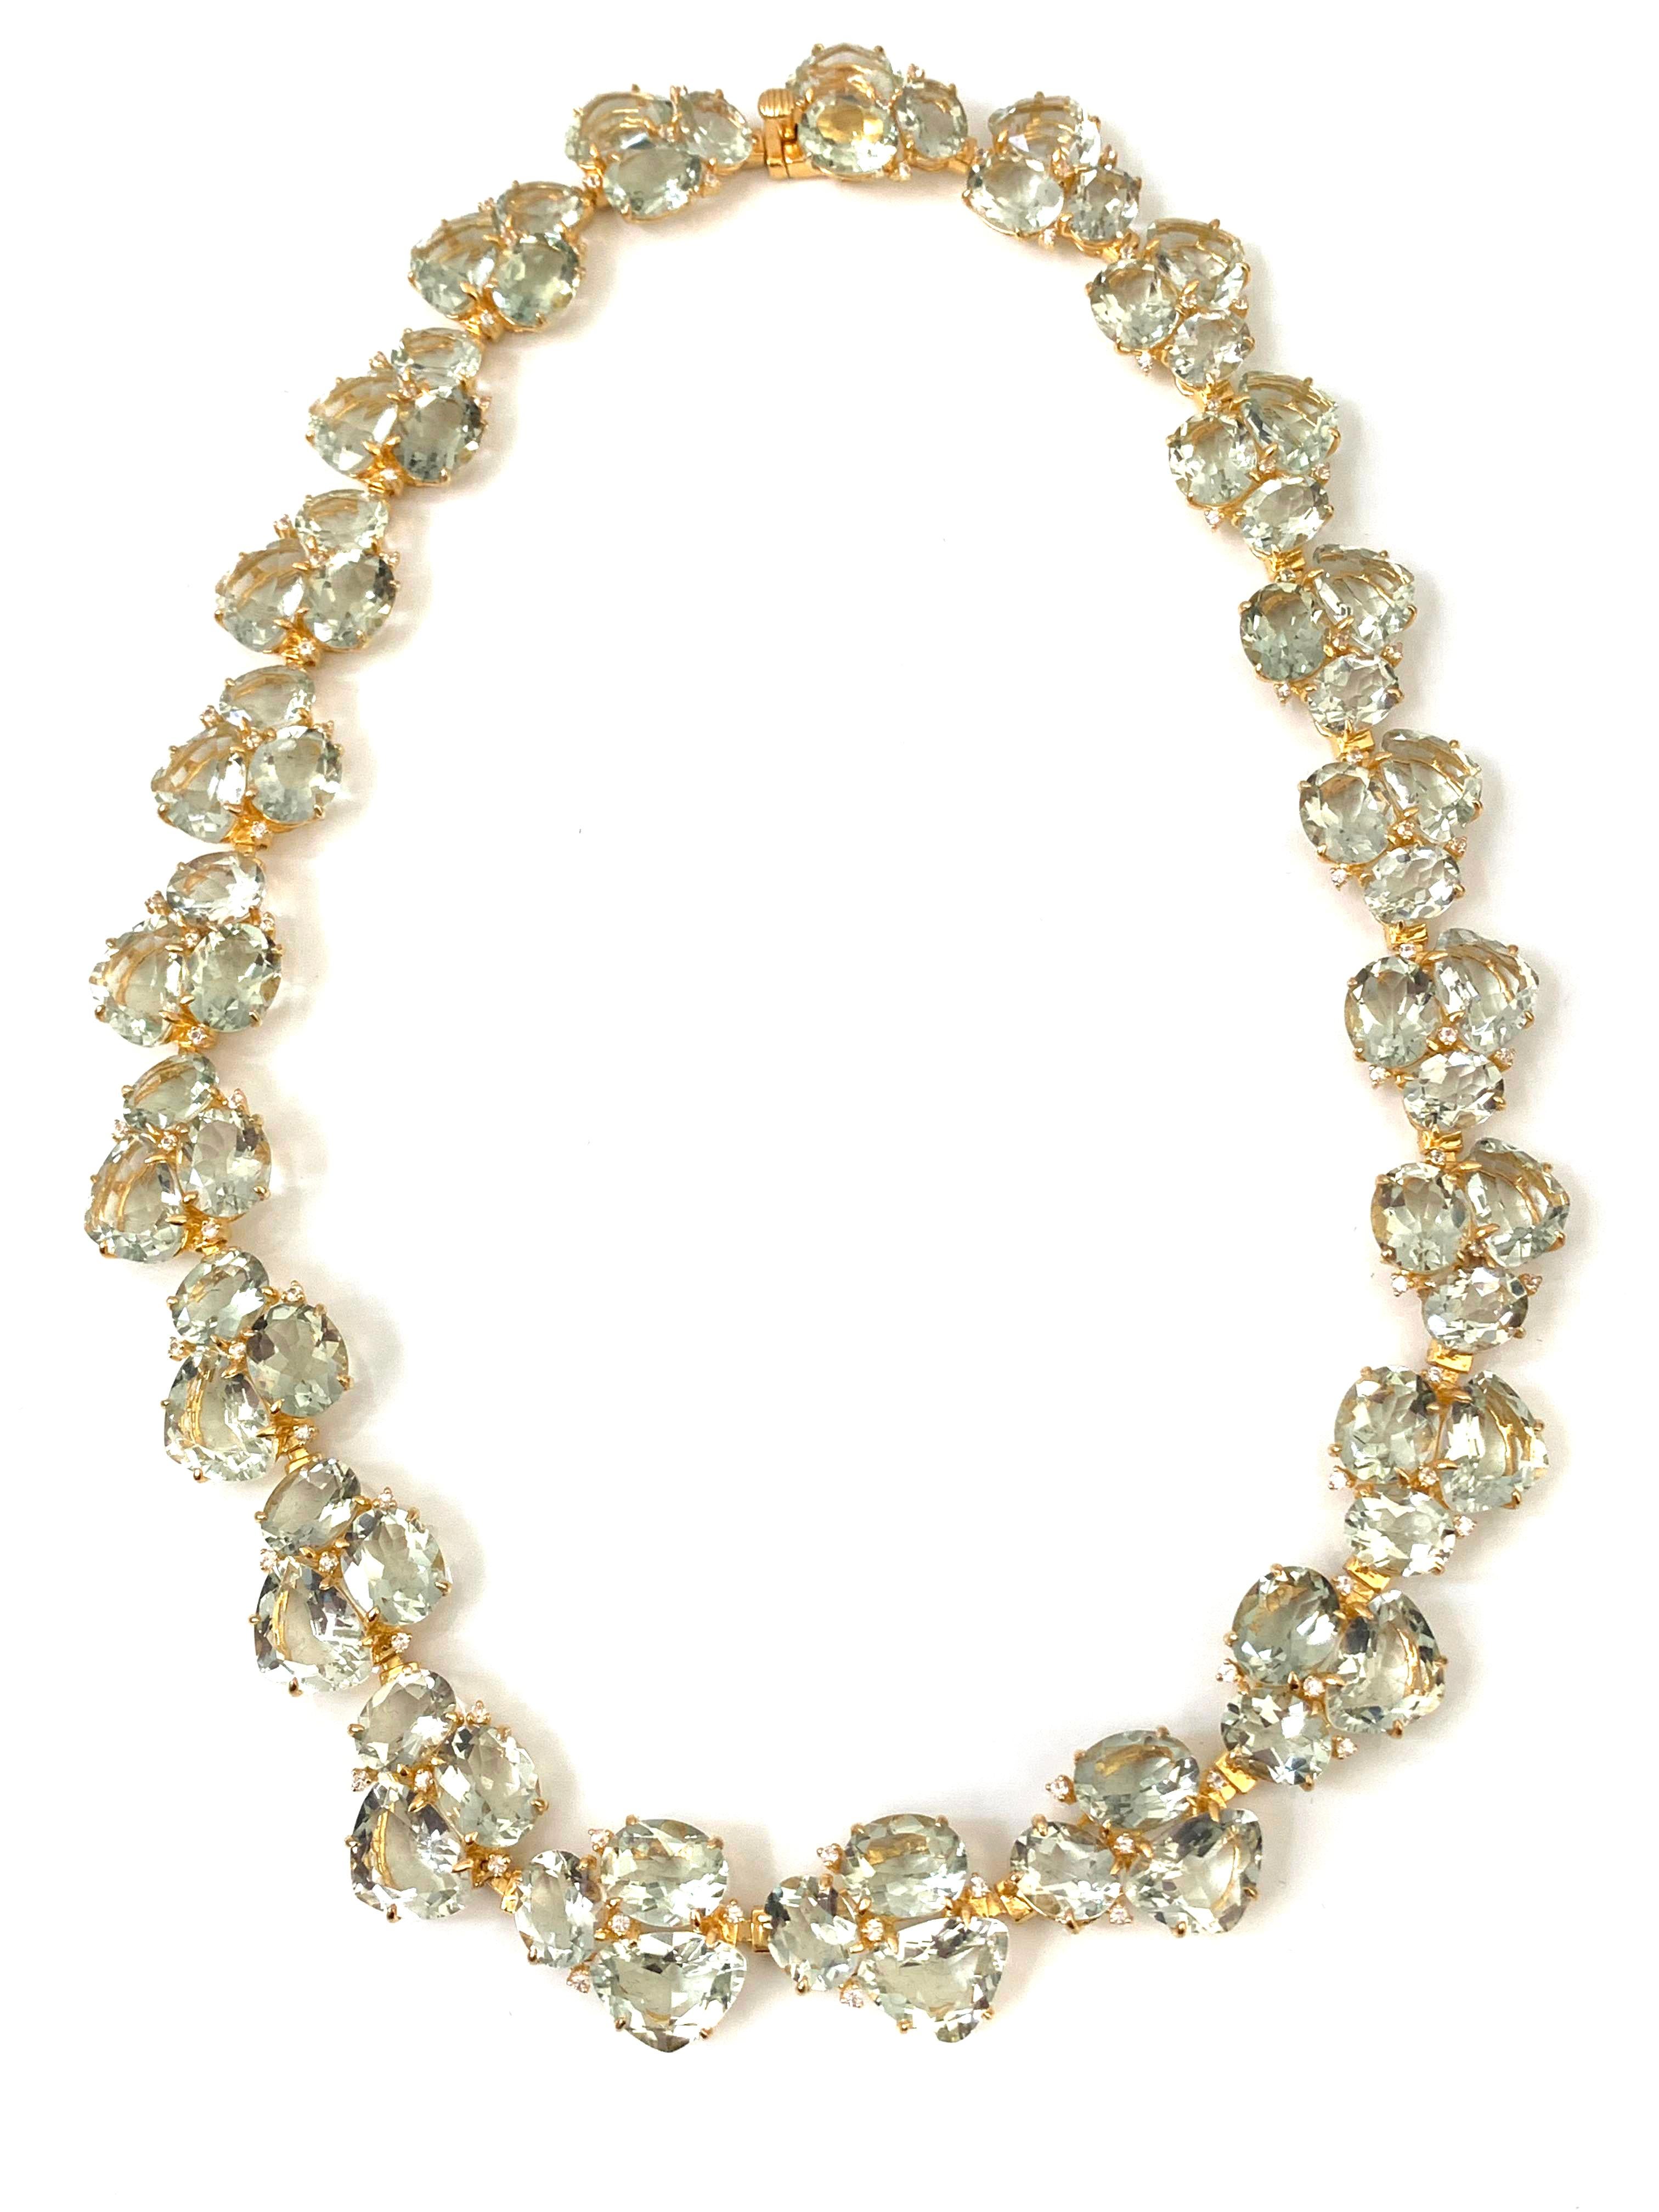 Elegant Prasiolite (Green Amethyst) and White Sapphire Necklace. 161 pieces of fancy-cut triangle green amethyst, oval prasiolite (220 ctw), and round white sapphires individually handset in vermeil 18k gold plated sterling silver. Push clasp lock